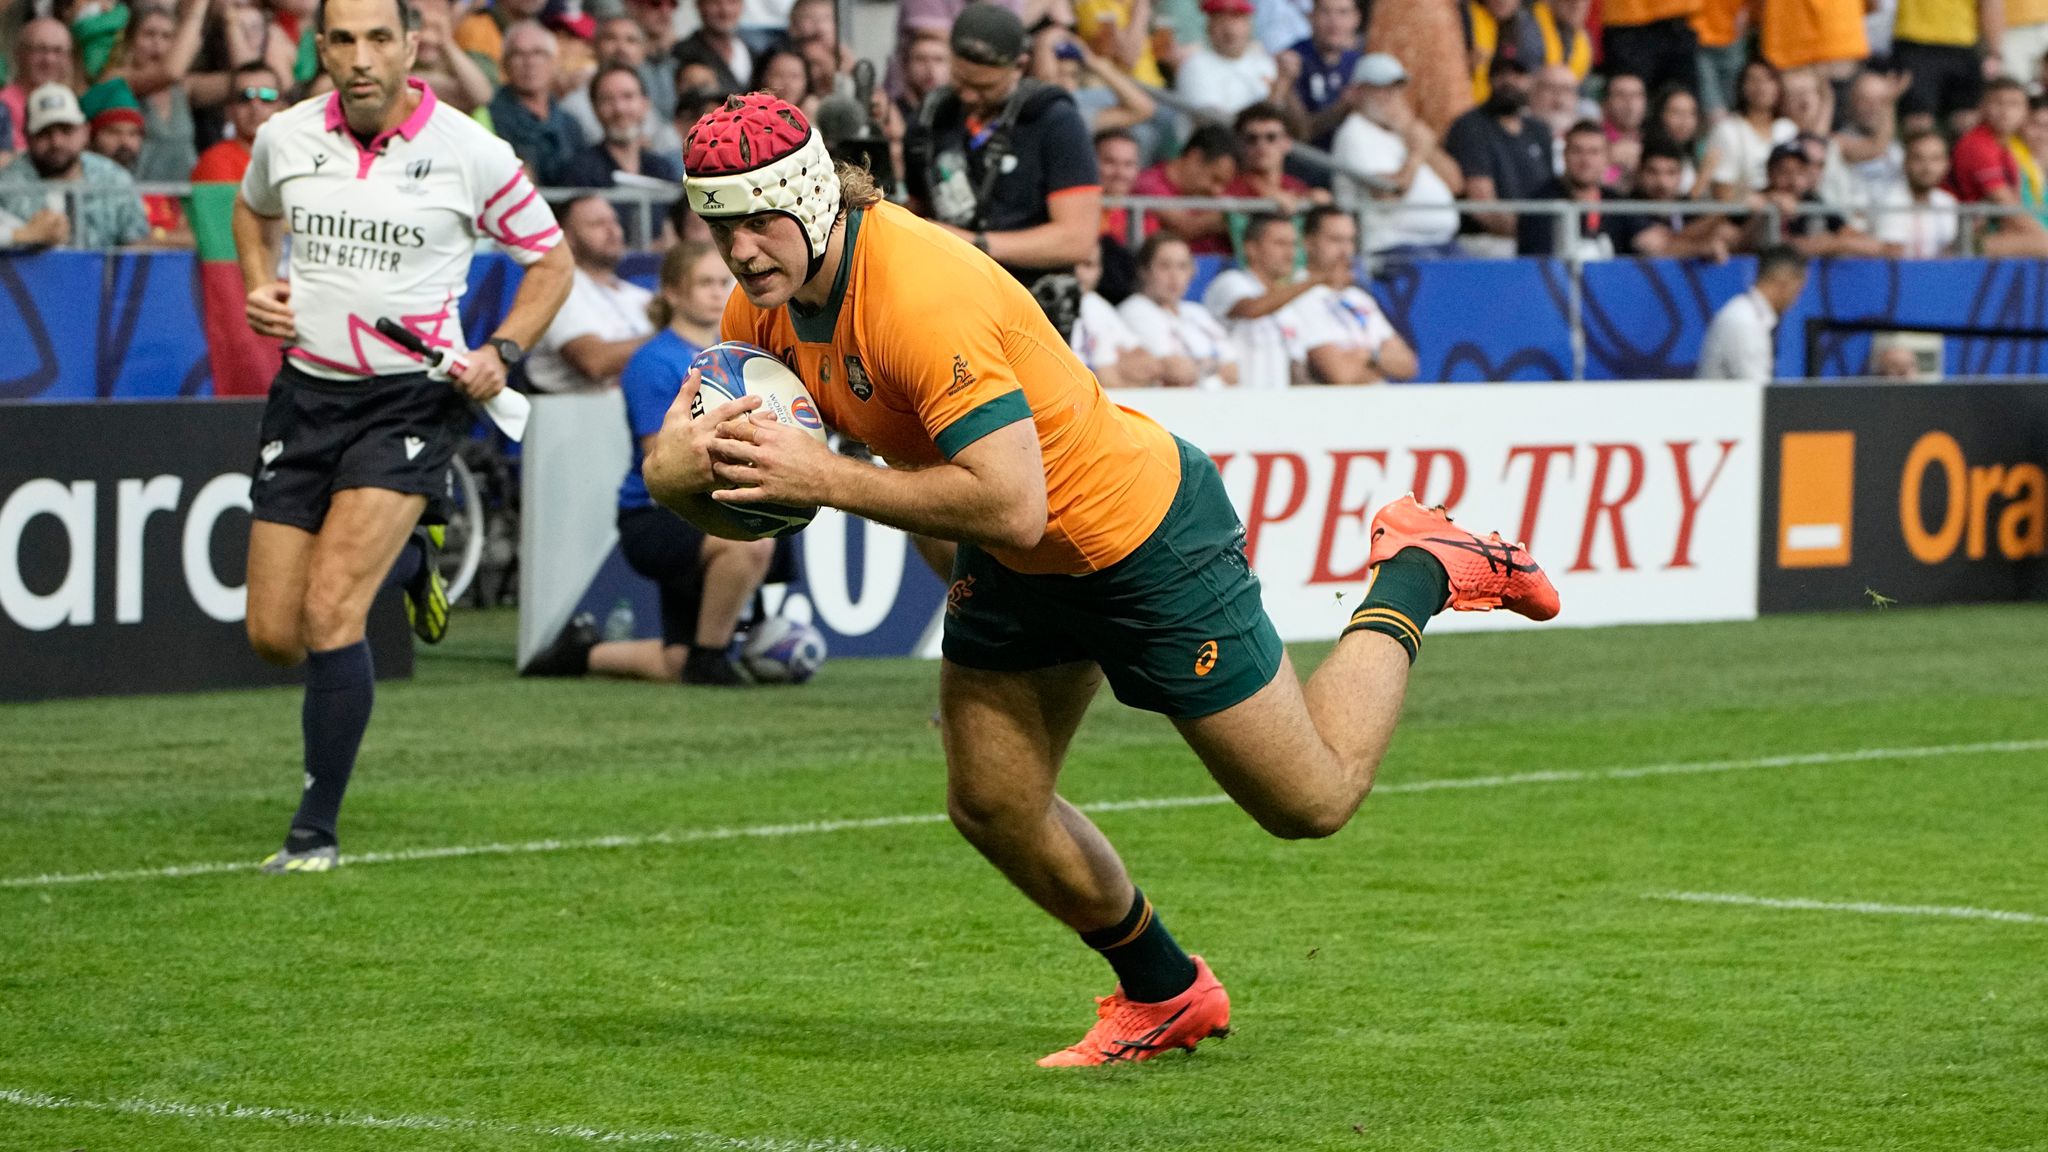 Rugby World Cup Australia defeat Portugal 34-14 to keep their slim hopes of making quarter-finals alive Rugby Union News Sky Sports